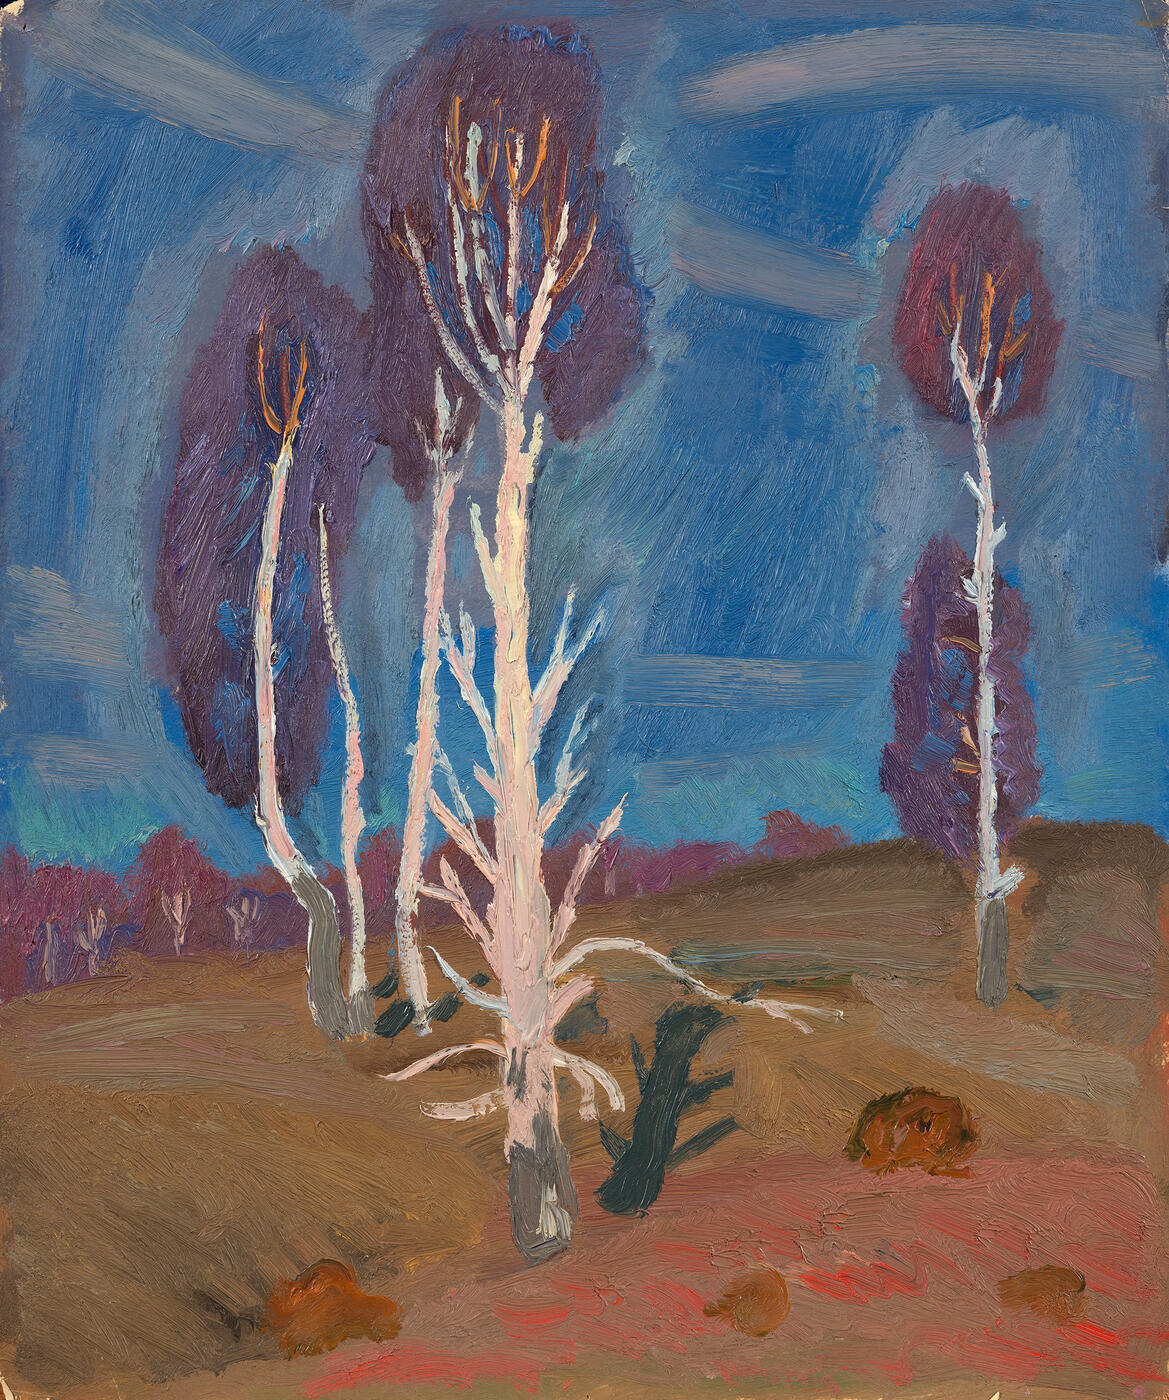 Landscape with Birch Trees